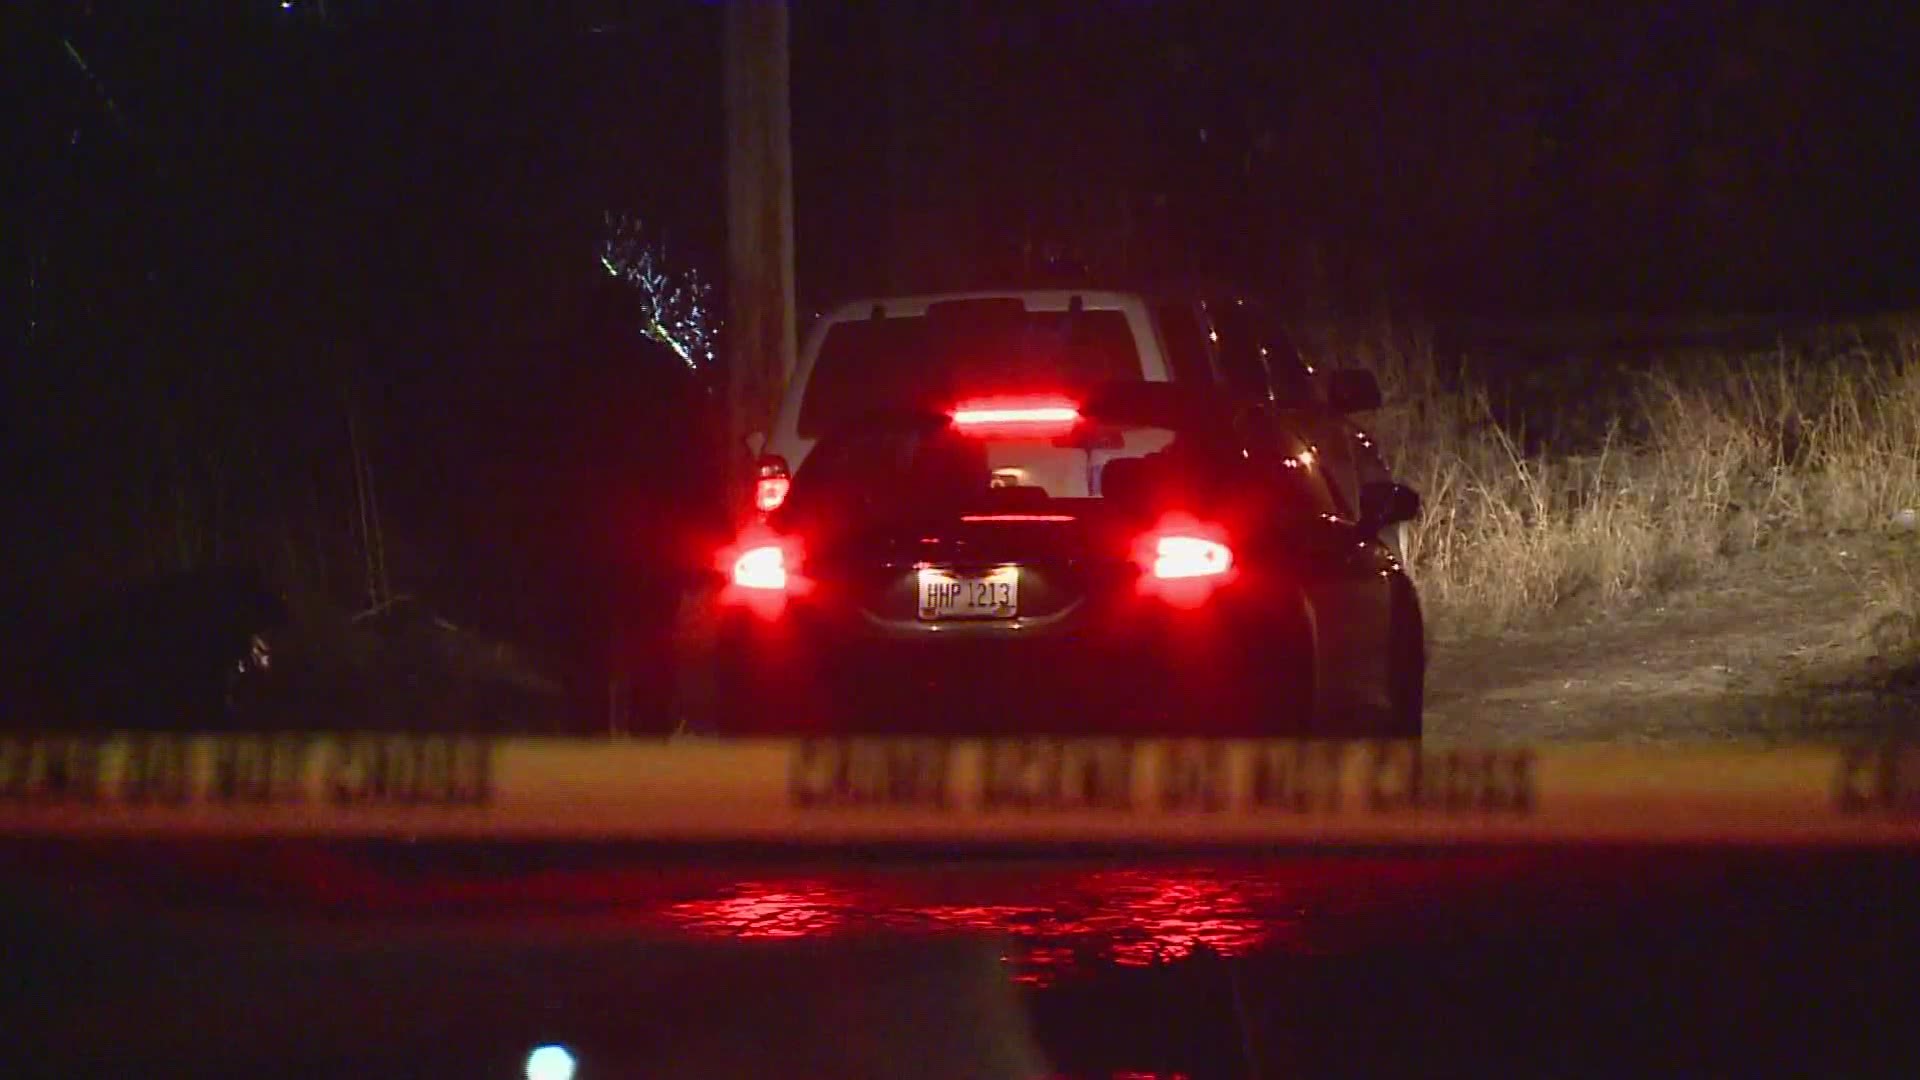 Feb. 19, 2020: Police are investigating after a body was found on fire near railroad tracks in Cleveland early Wednesday morning. The body was also dismembered.